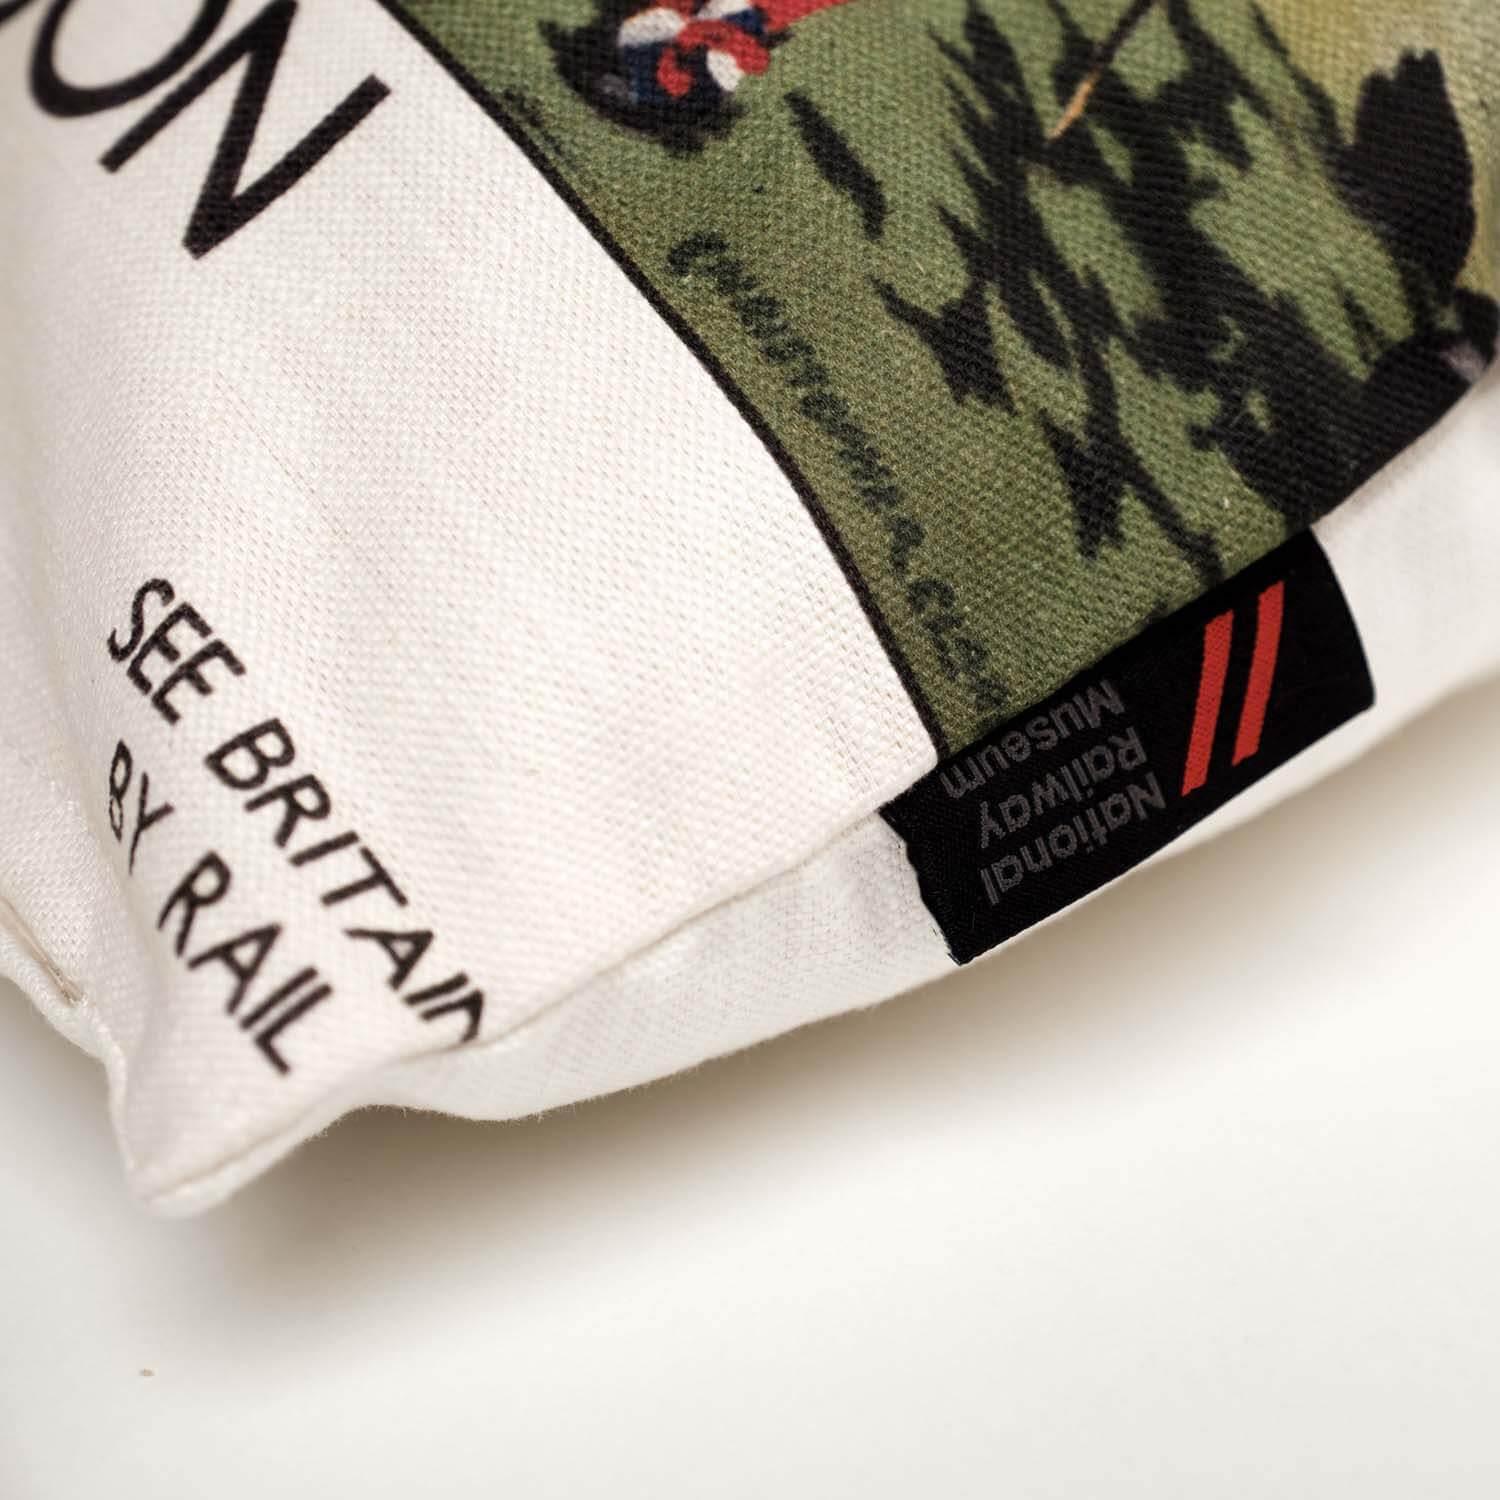 Spend Your Holidays In The Lake District’ LMS 1923 -1947- National Railways Musuem Cushion - Handmade Cushions UK - WeLoveCushions